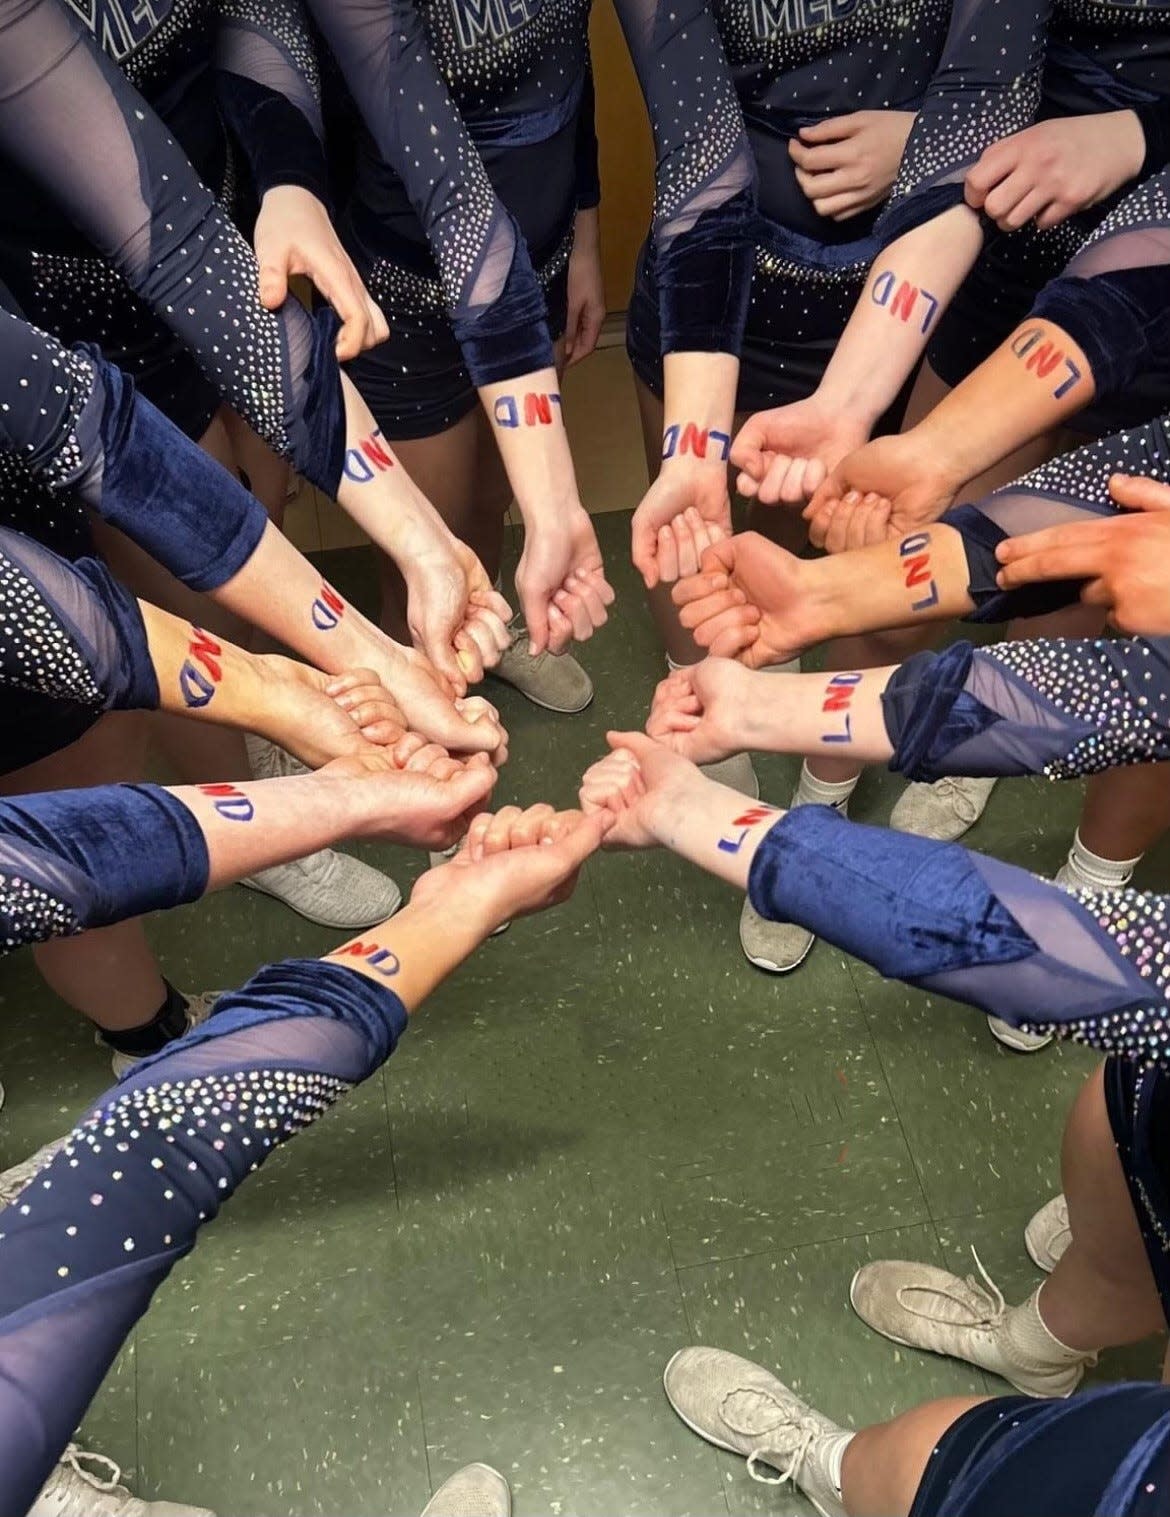 The Medway High cheerleading team wrote "LND" on their arms, which stands for "Leave No Doubt" and became the team's motto for the postseason.